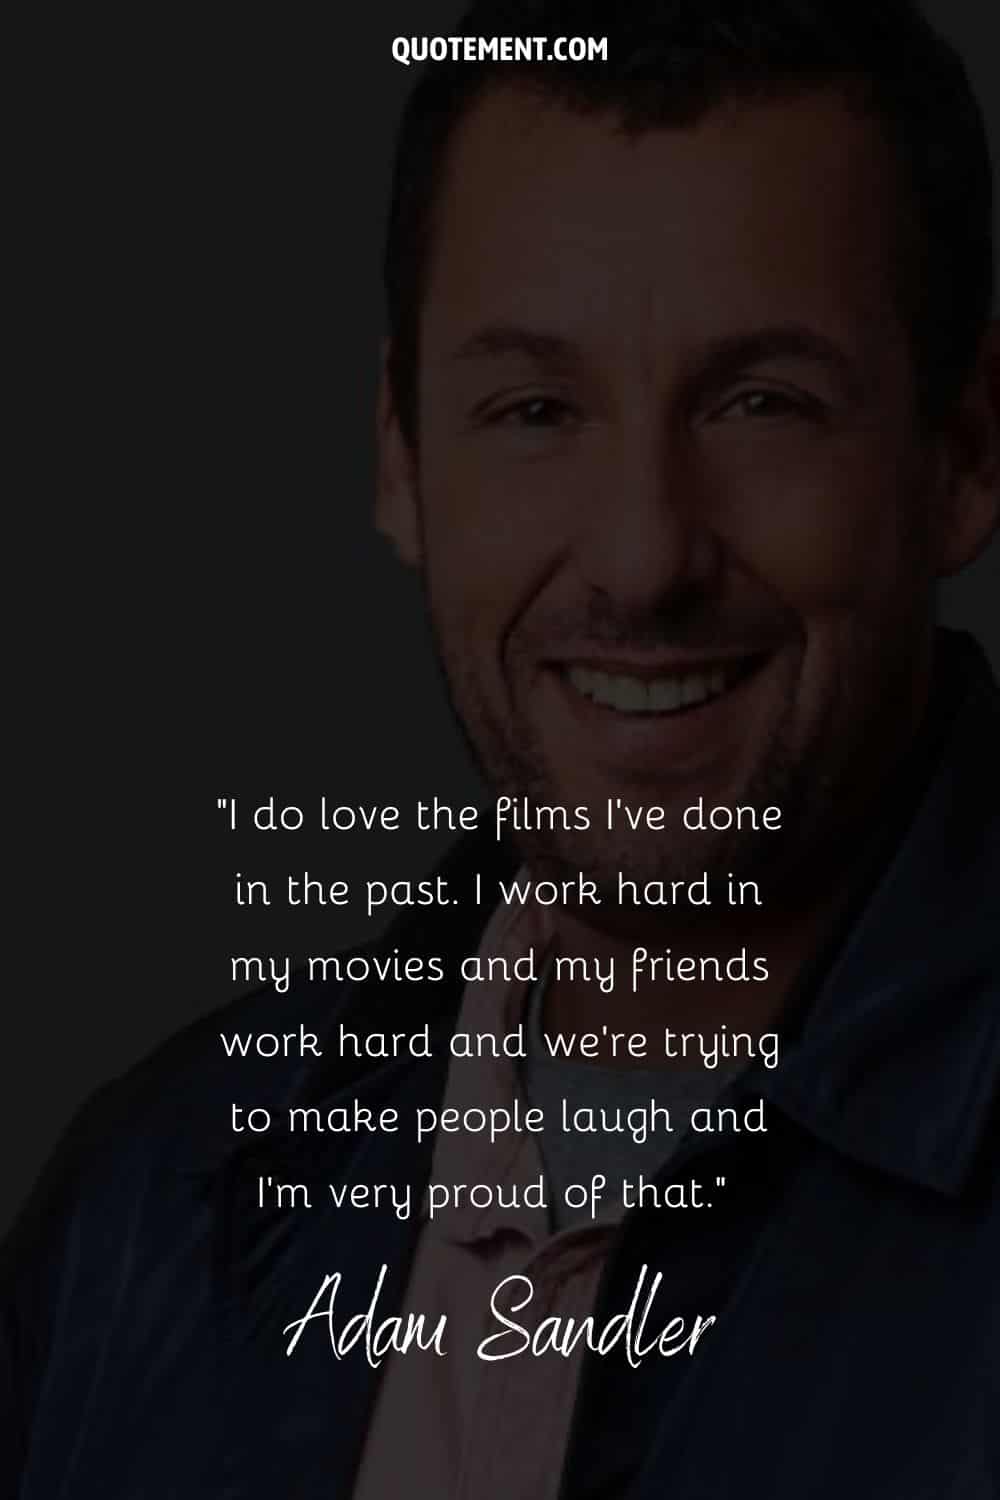 quote by Adam Sandler about the movies he's done